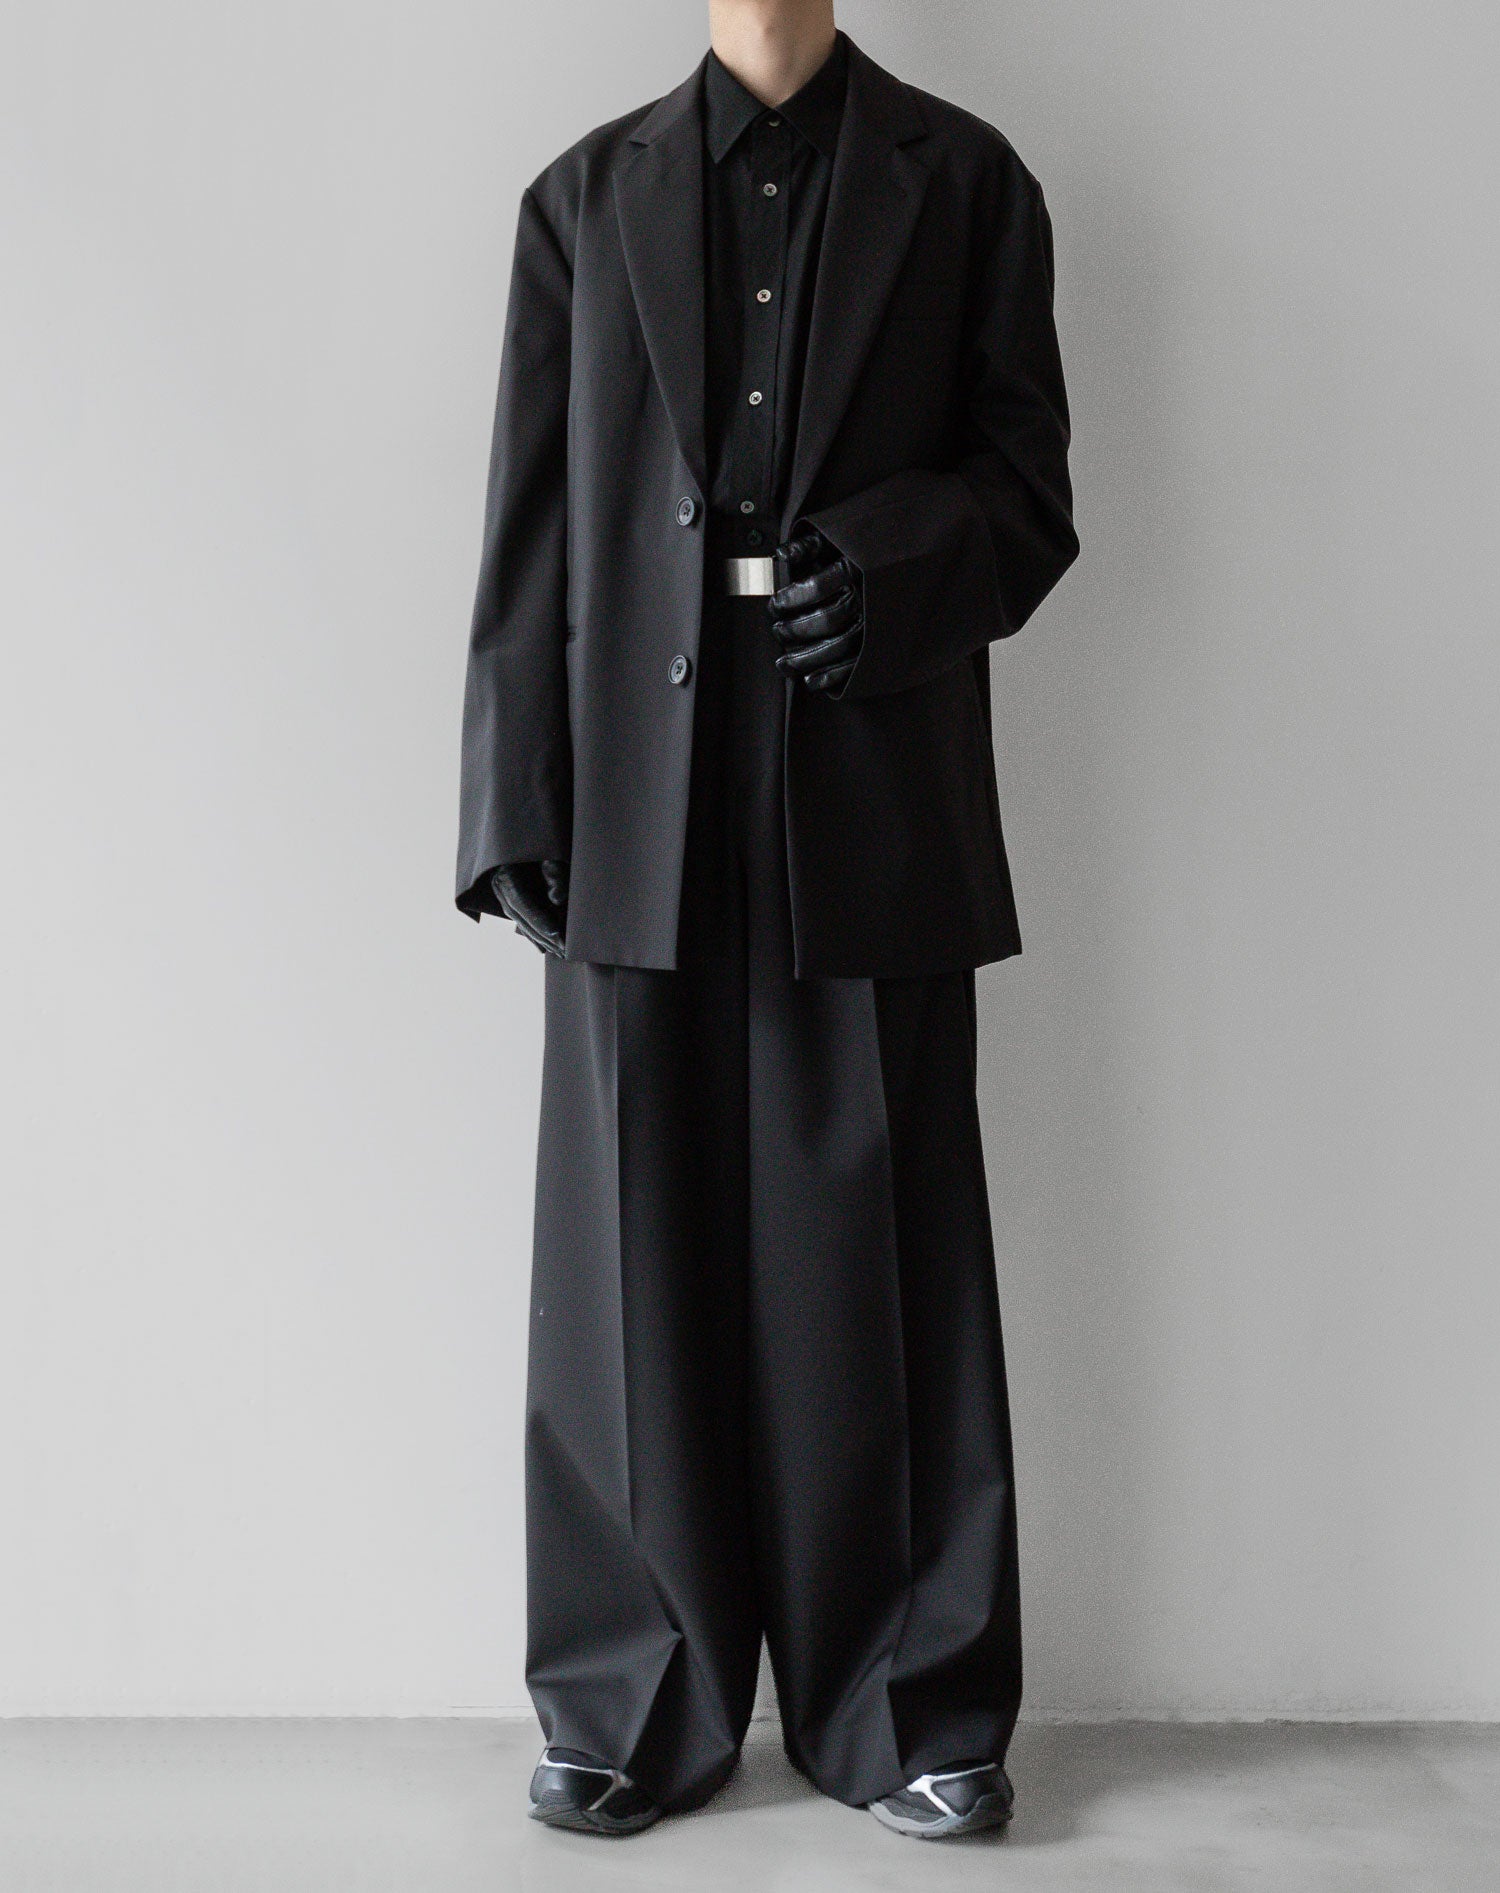 stein / シュタイン】EXTRA WIDE TROUSERS - DARK CHARCOAL | 公式通販 